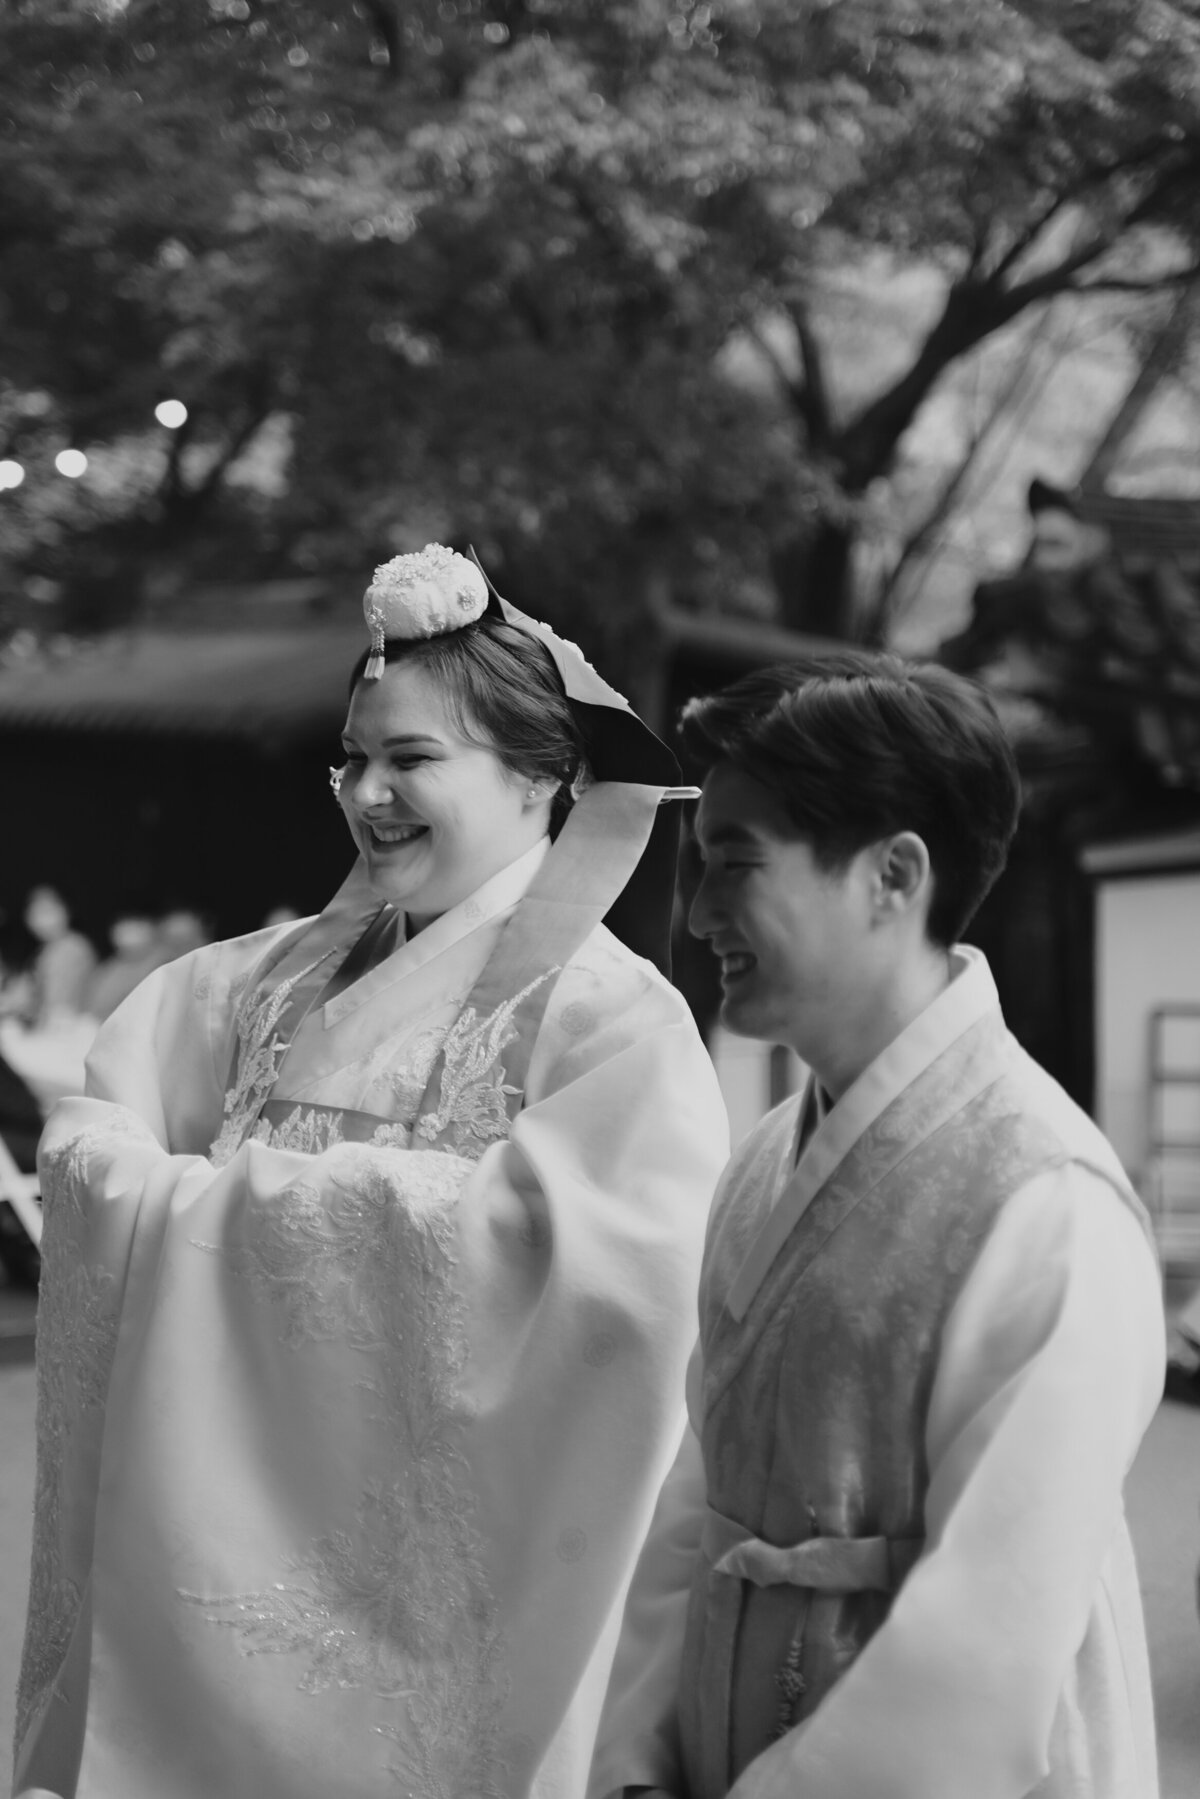 bride and groom in hanbok during their wedding ceremony in seoul